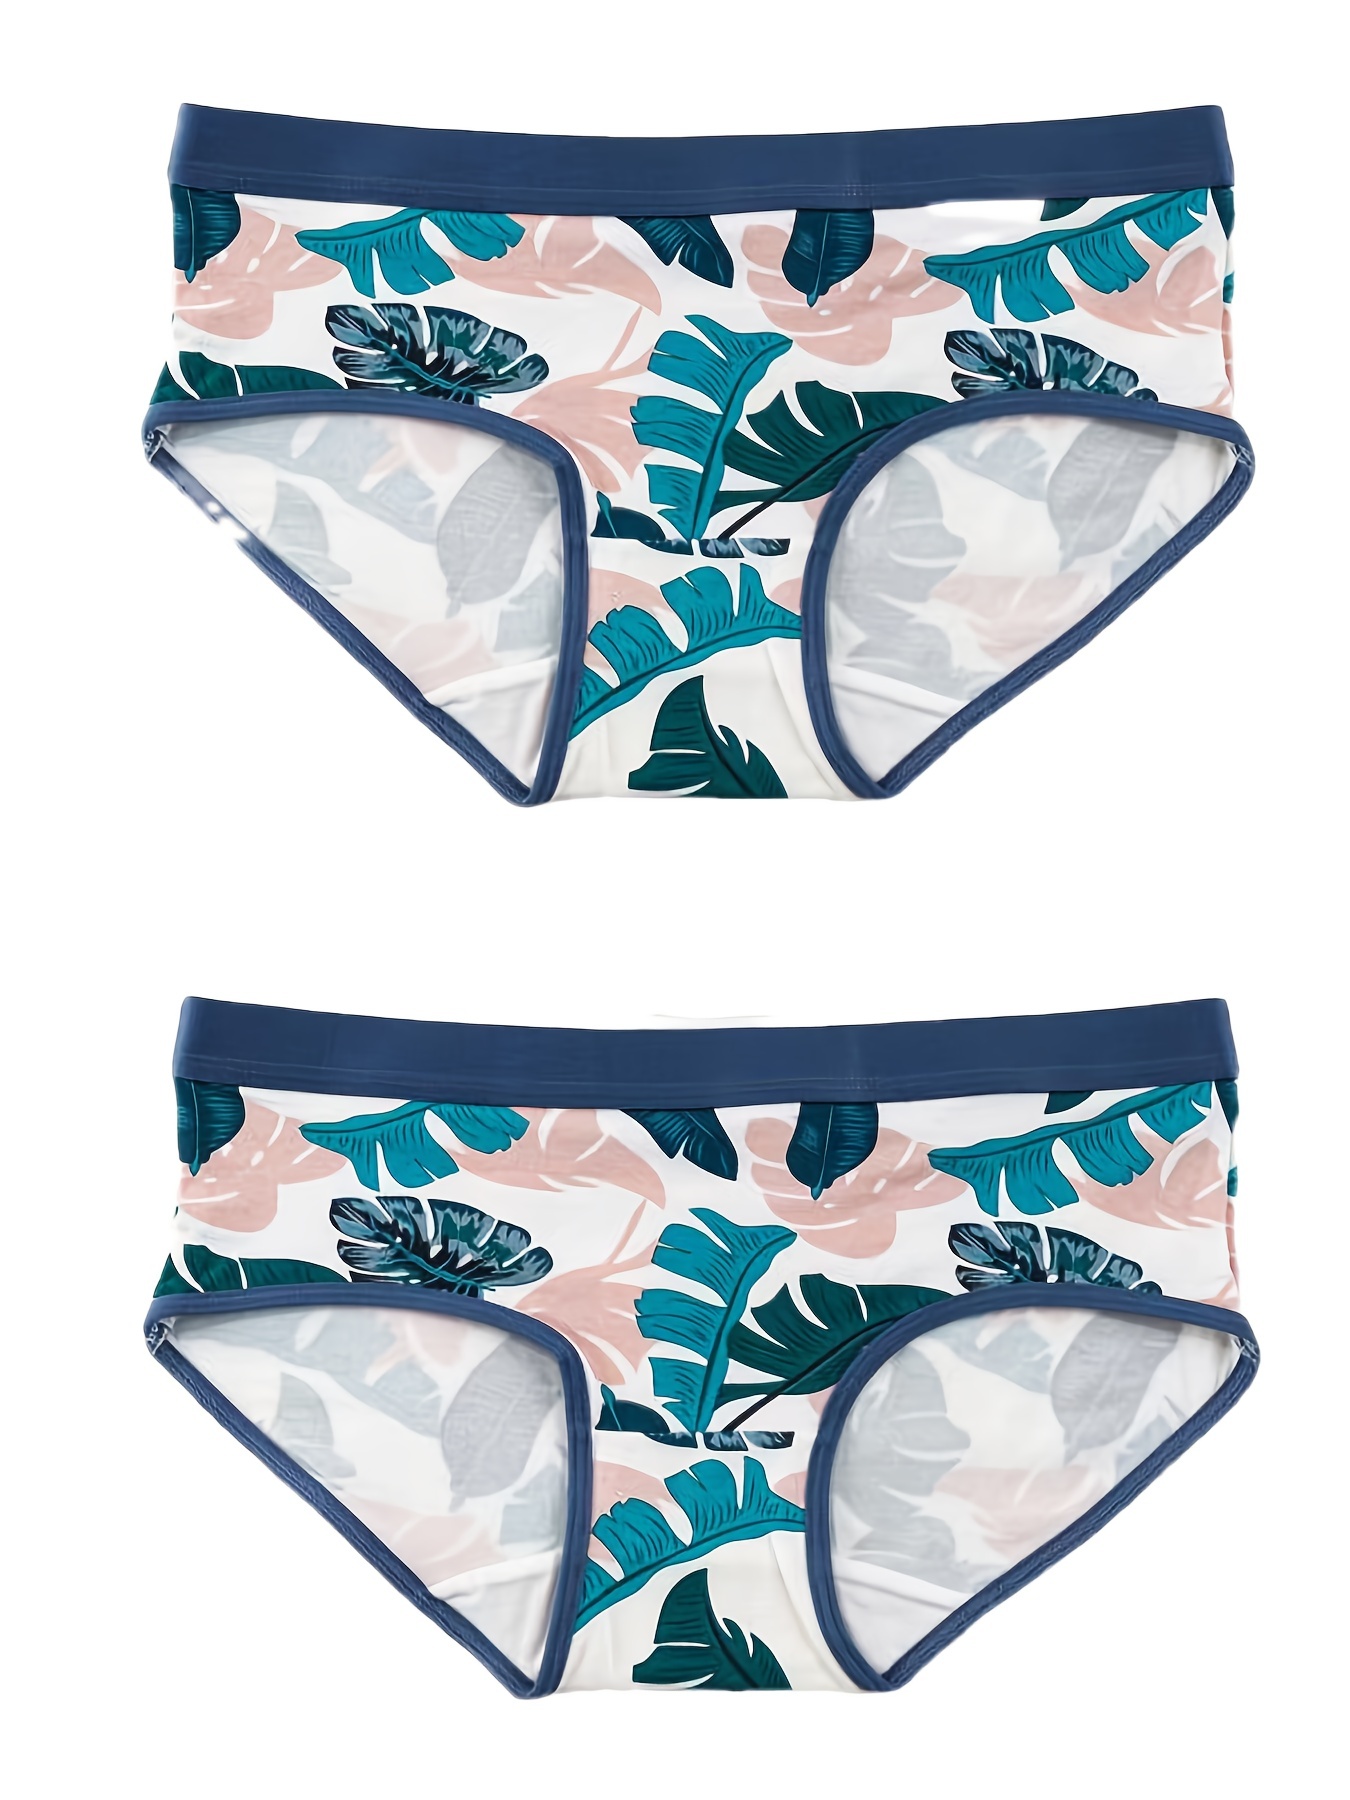 Custom His & Hers Matching Sets - Low-Rise Underwear